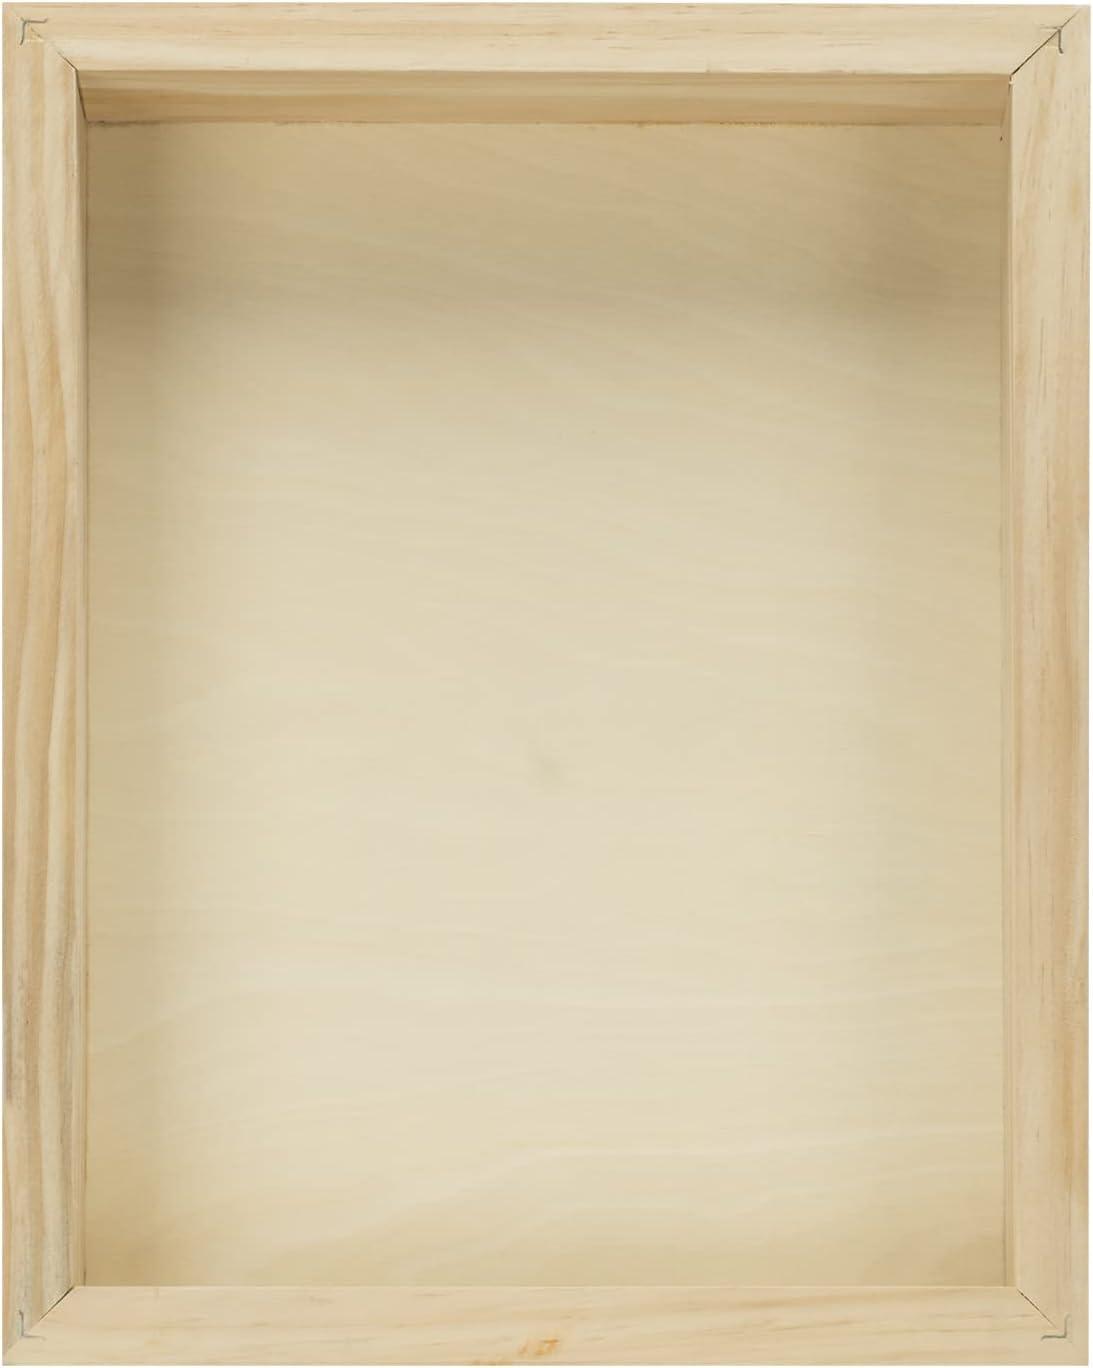 Davinci Pro Birch Wood Painting Panel - 18x24 Wood Panels - 4-Pack of  1-5/8in Deep Fine Grained Professional Wood Panels for Painting Students  Classrooms Studios Acrylics and More